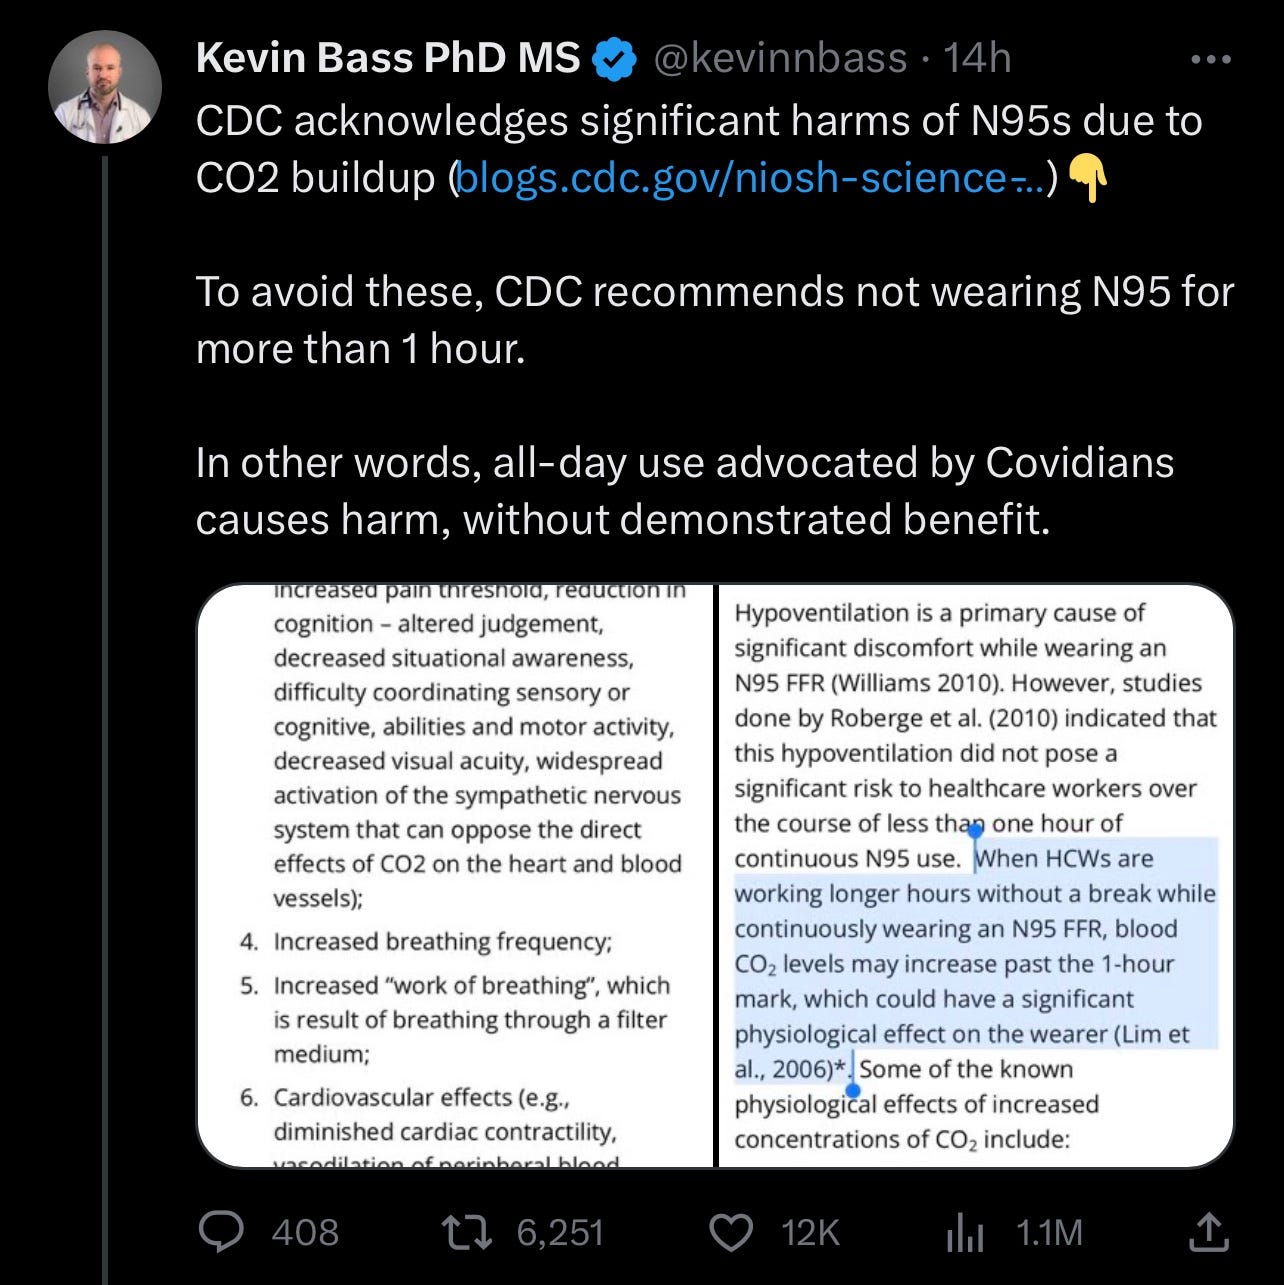 kevin bass making an outright fictional statement that N95s are somehow harmful and cause CO2 buildup